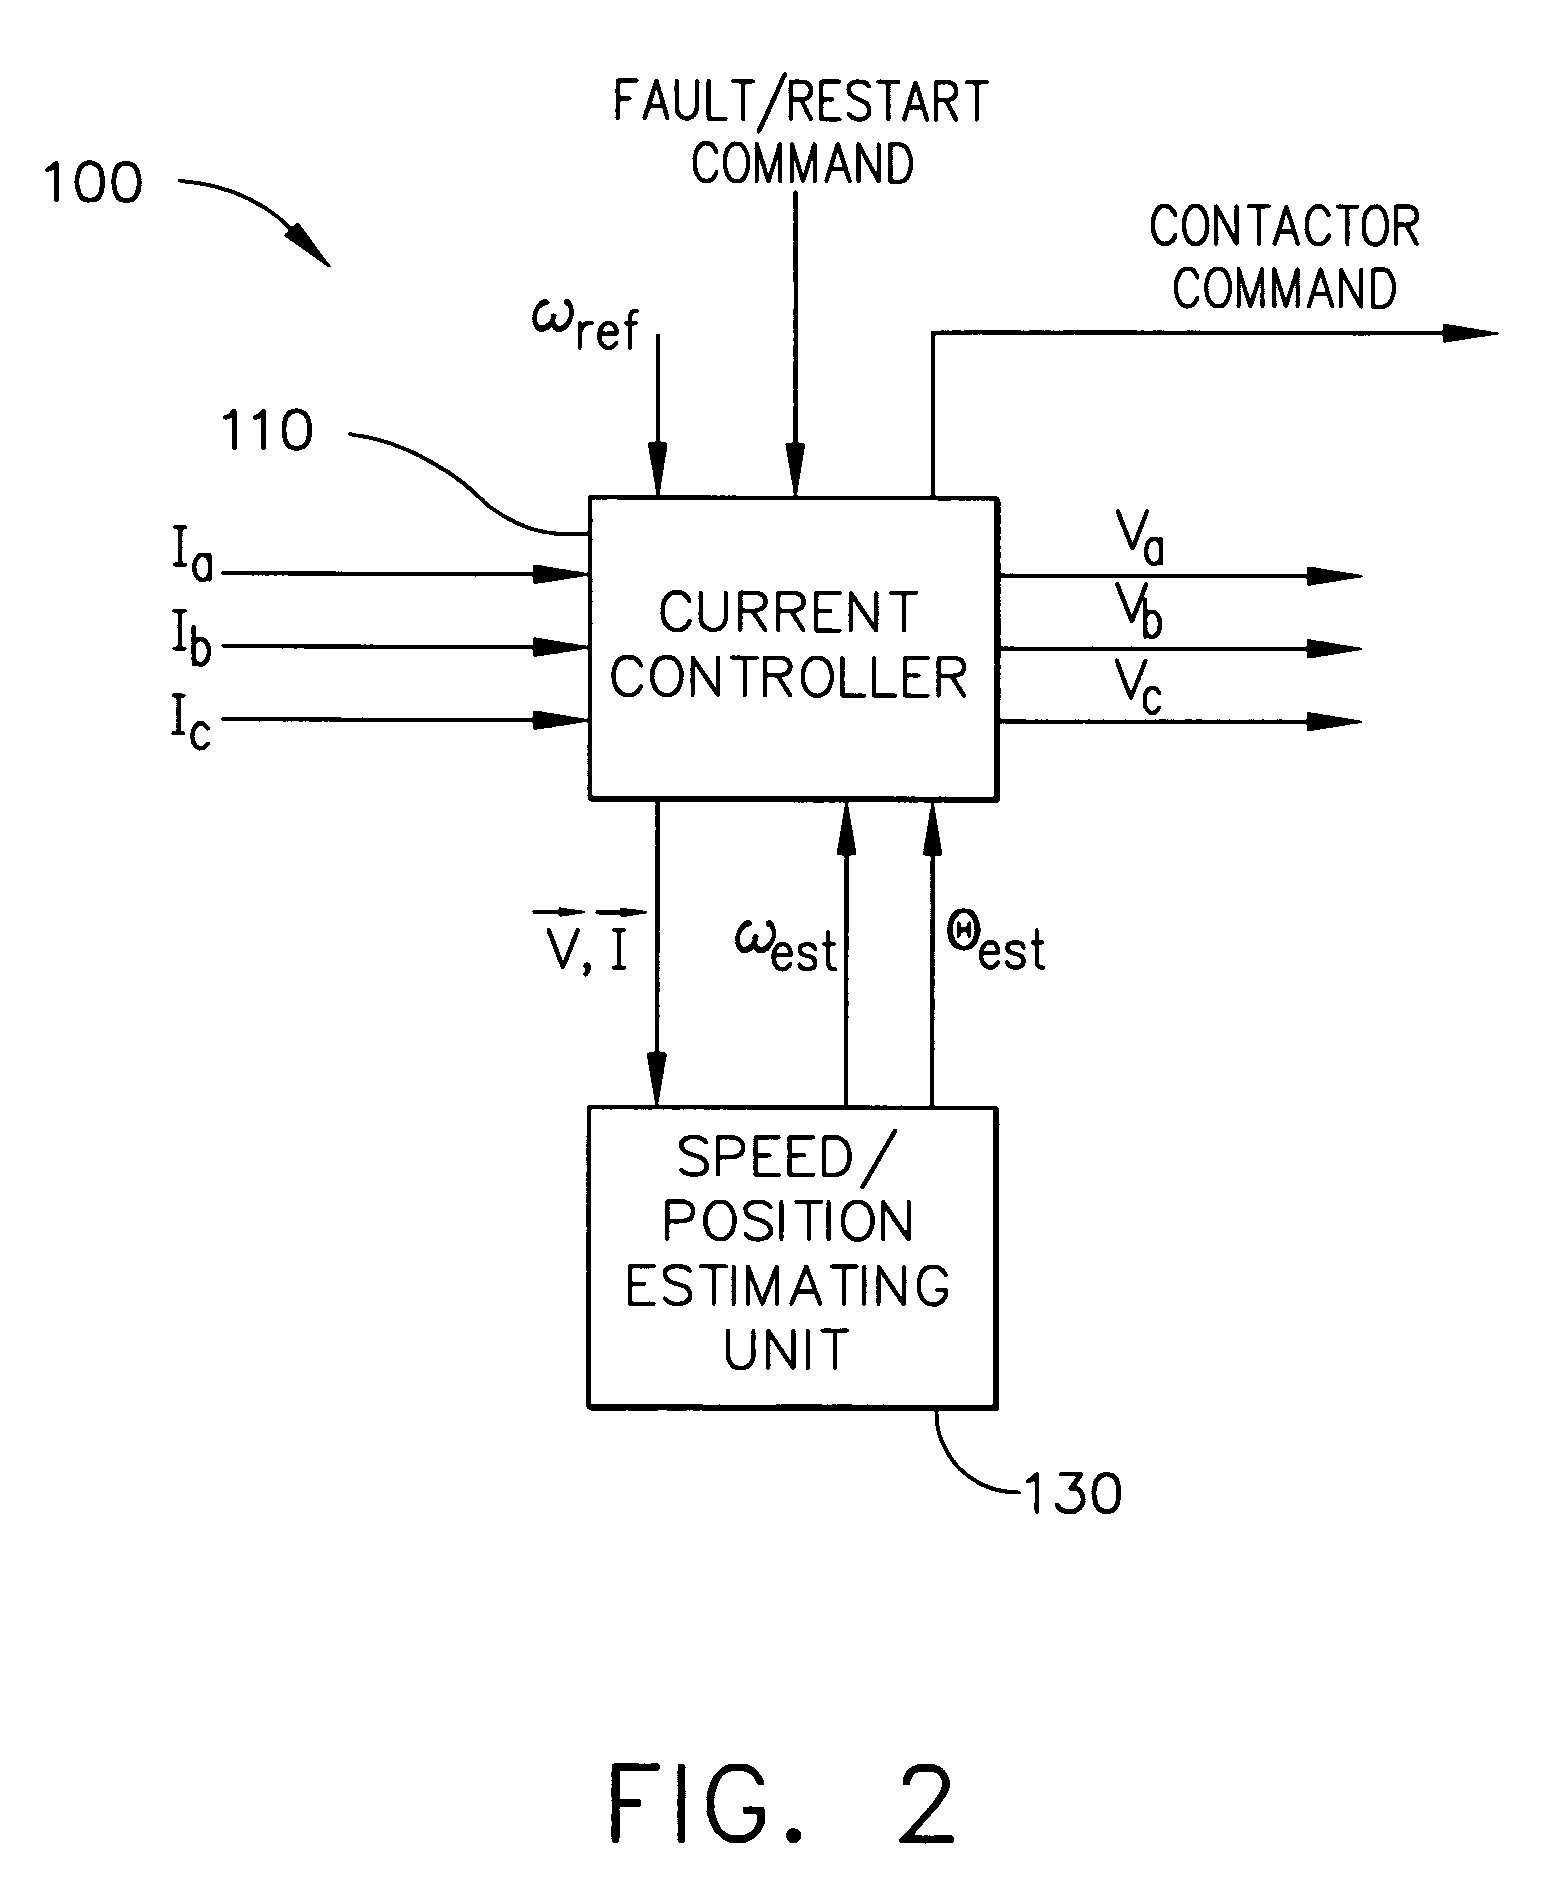 Power converter controlling apparatus and method applying a fault protection scheme in a motor drive system